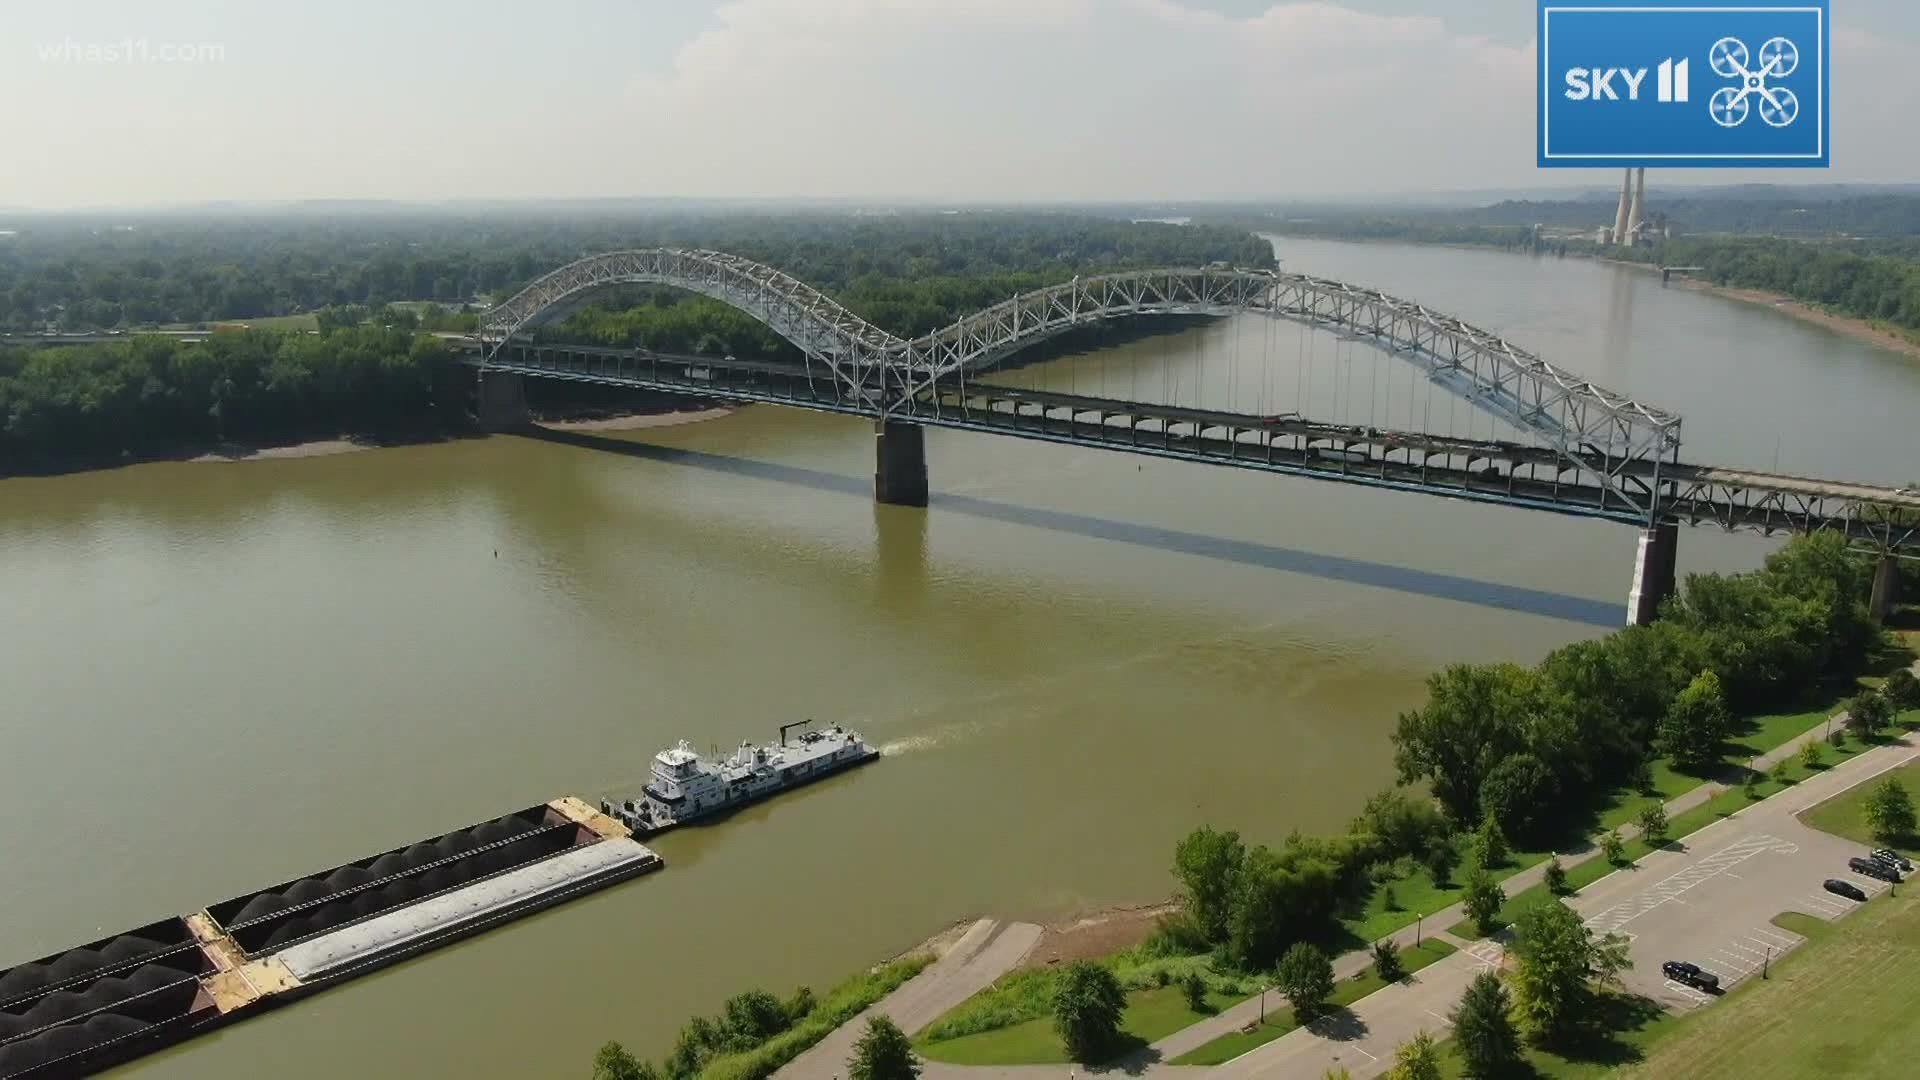 All westbound lanes of the Sherman Minton Bridge will be closed starting at 3 a.m. on Oct. 27. The closure will last nine days.